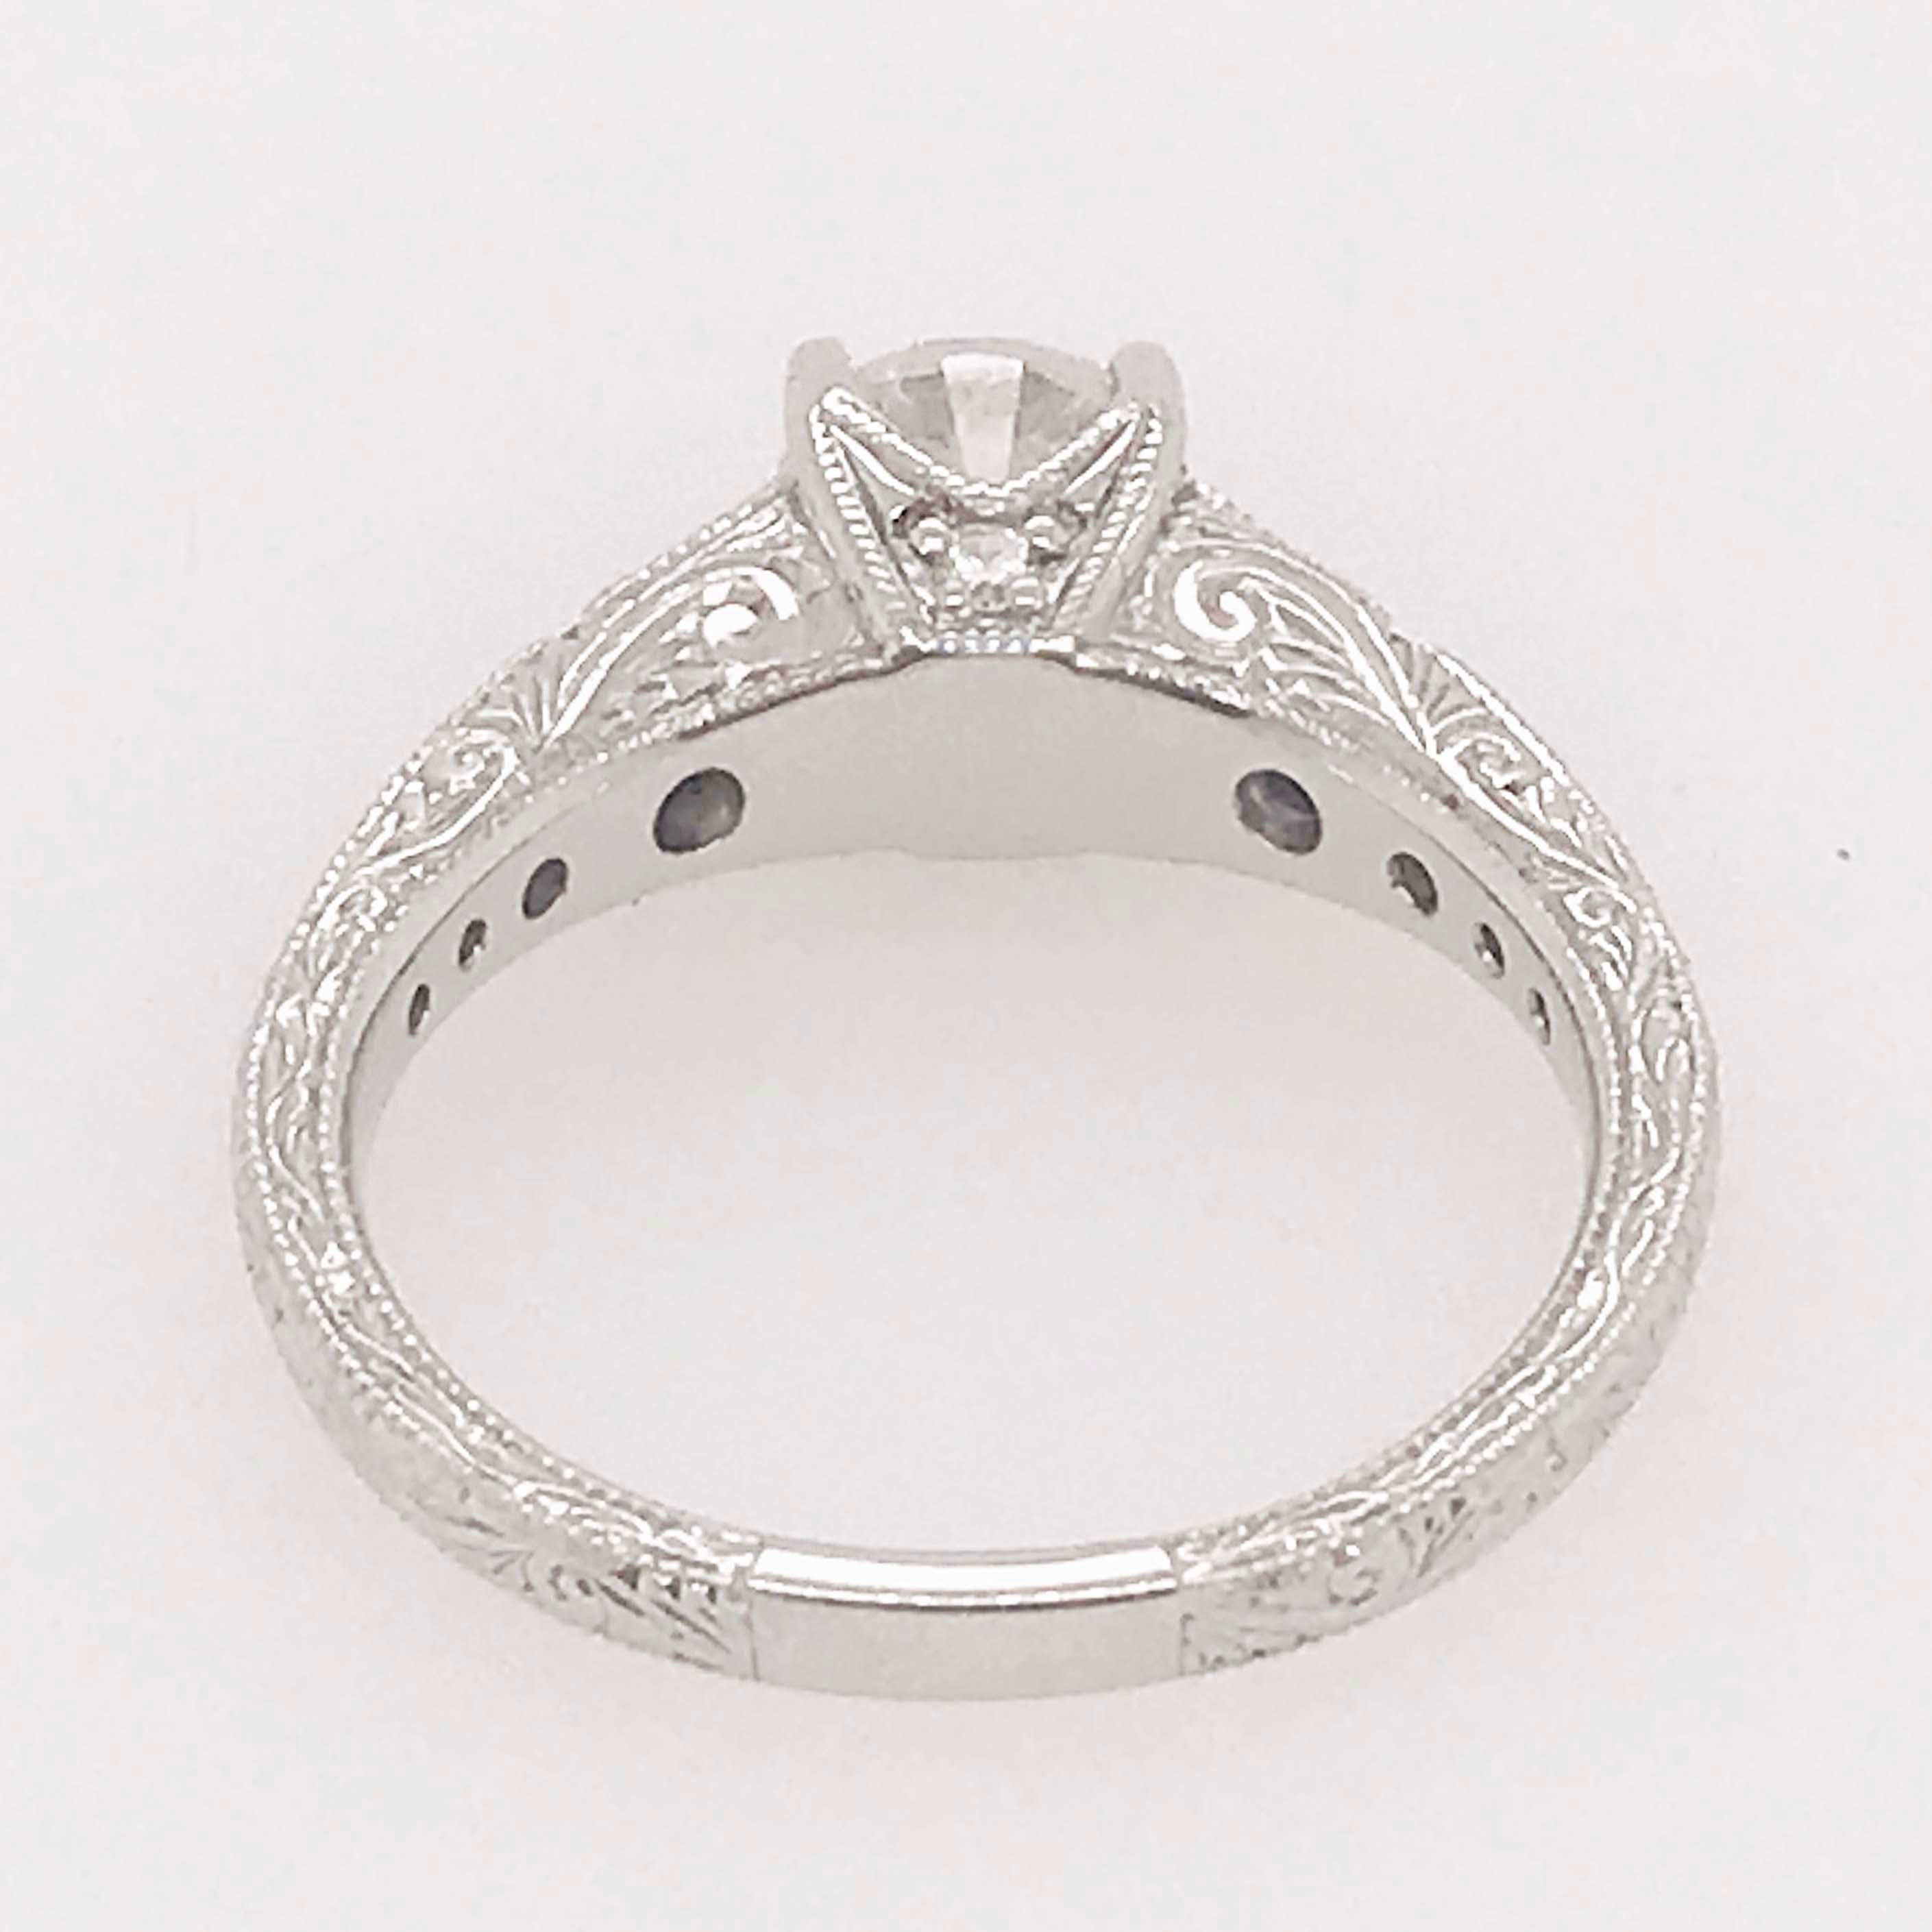 Women's Certified 1 Carat Diamond Vintage Style Ring and Antique Hand Engraving For Sale